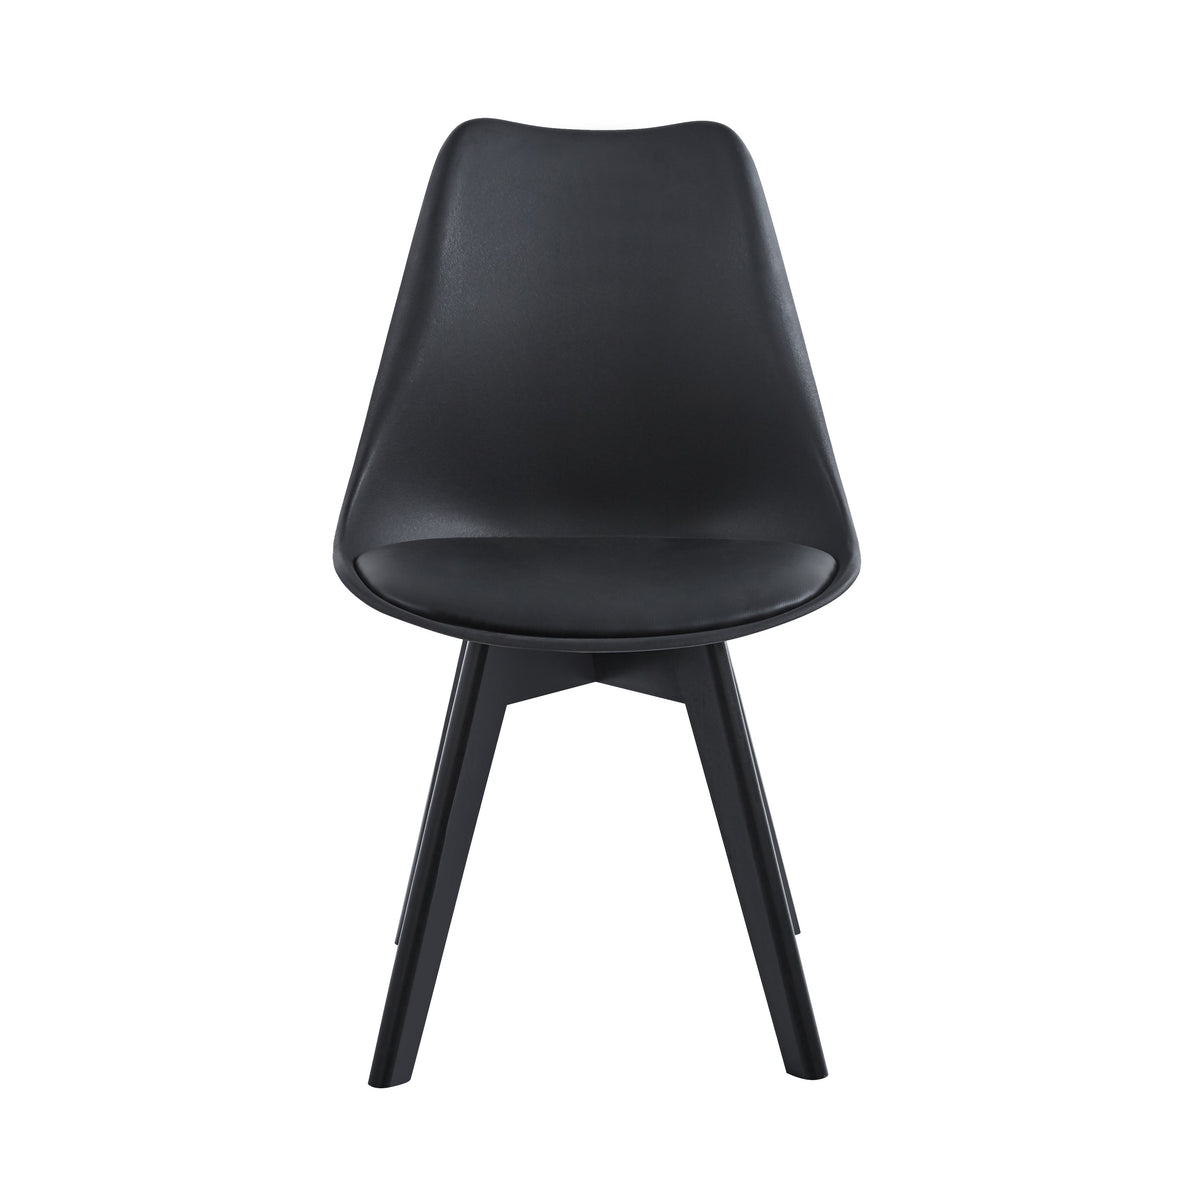 4 x Harris Ergonomic Dining Chairs - Black Chairs with Black Wooden Legs Casa Maria Designs 